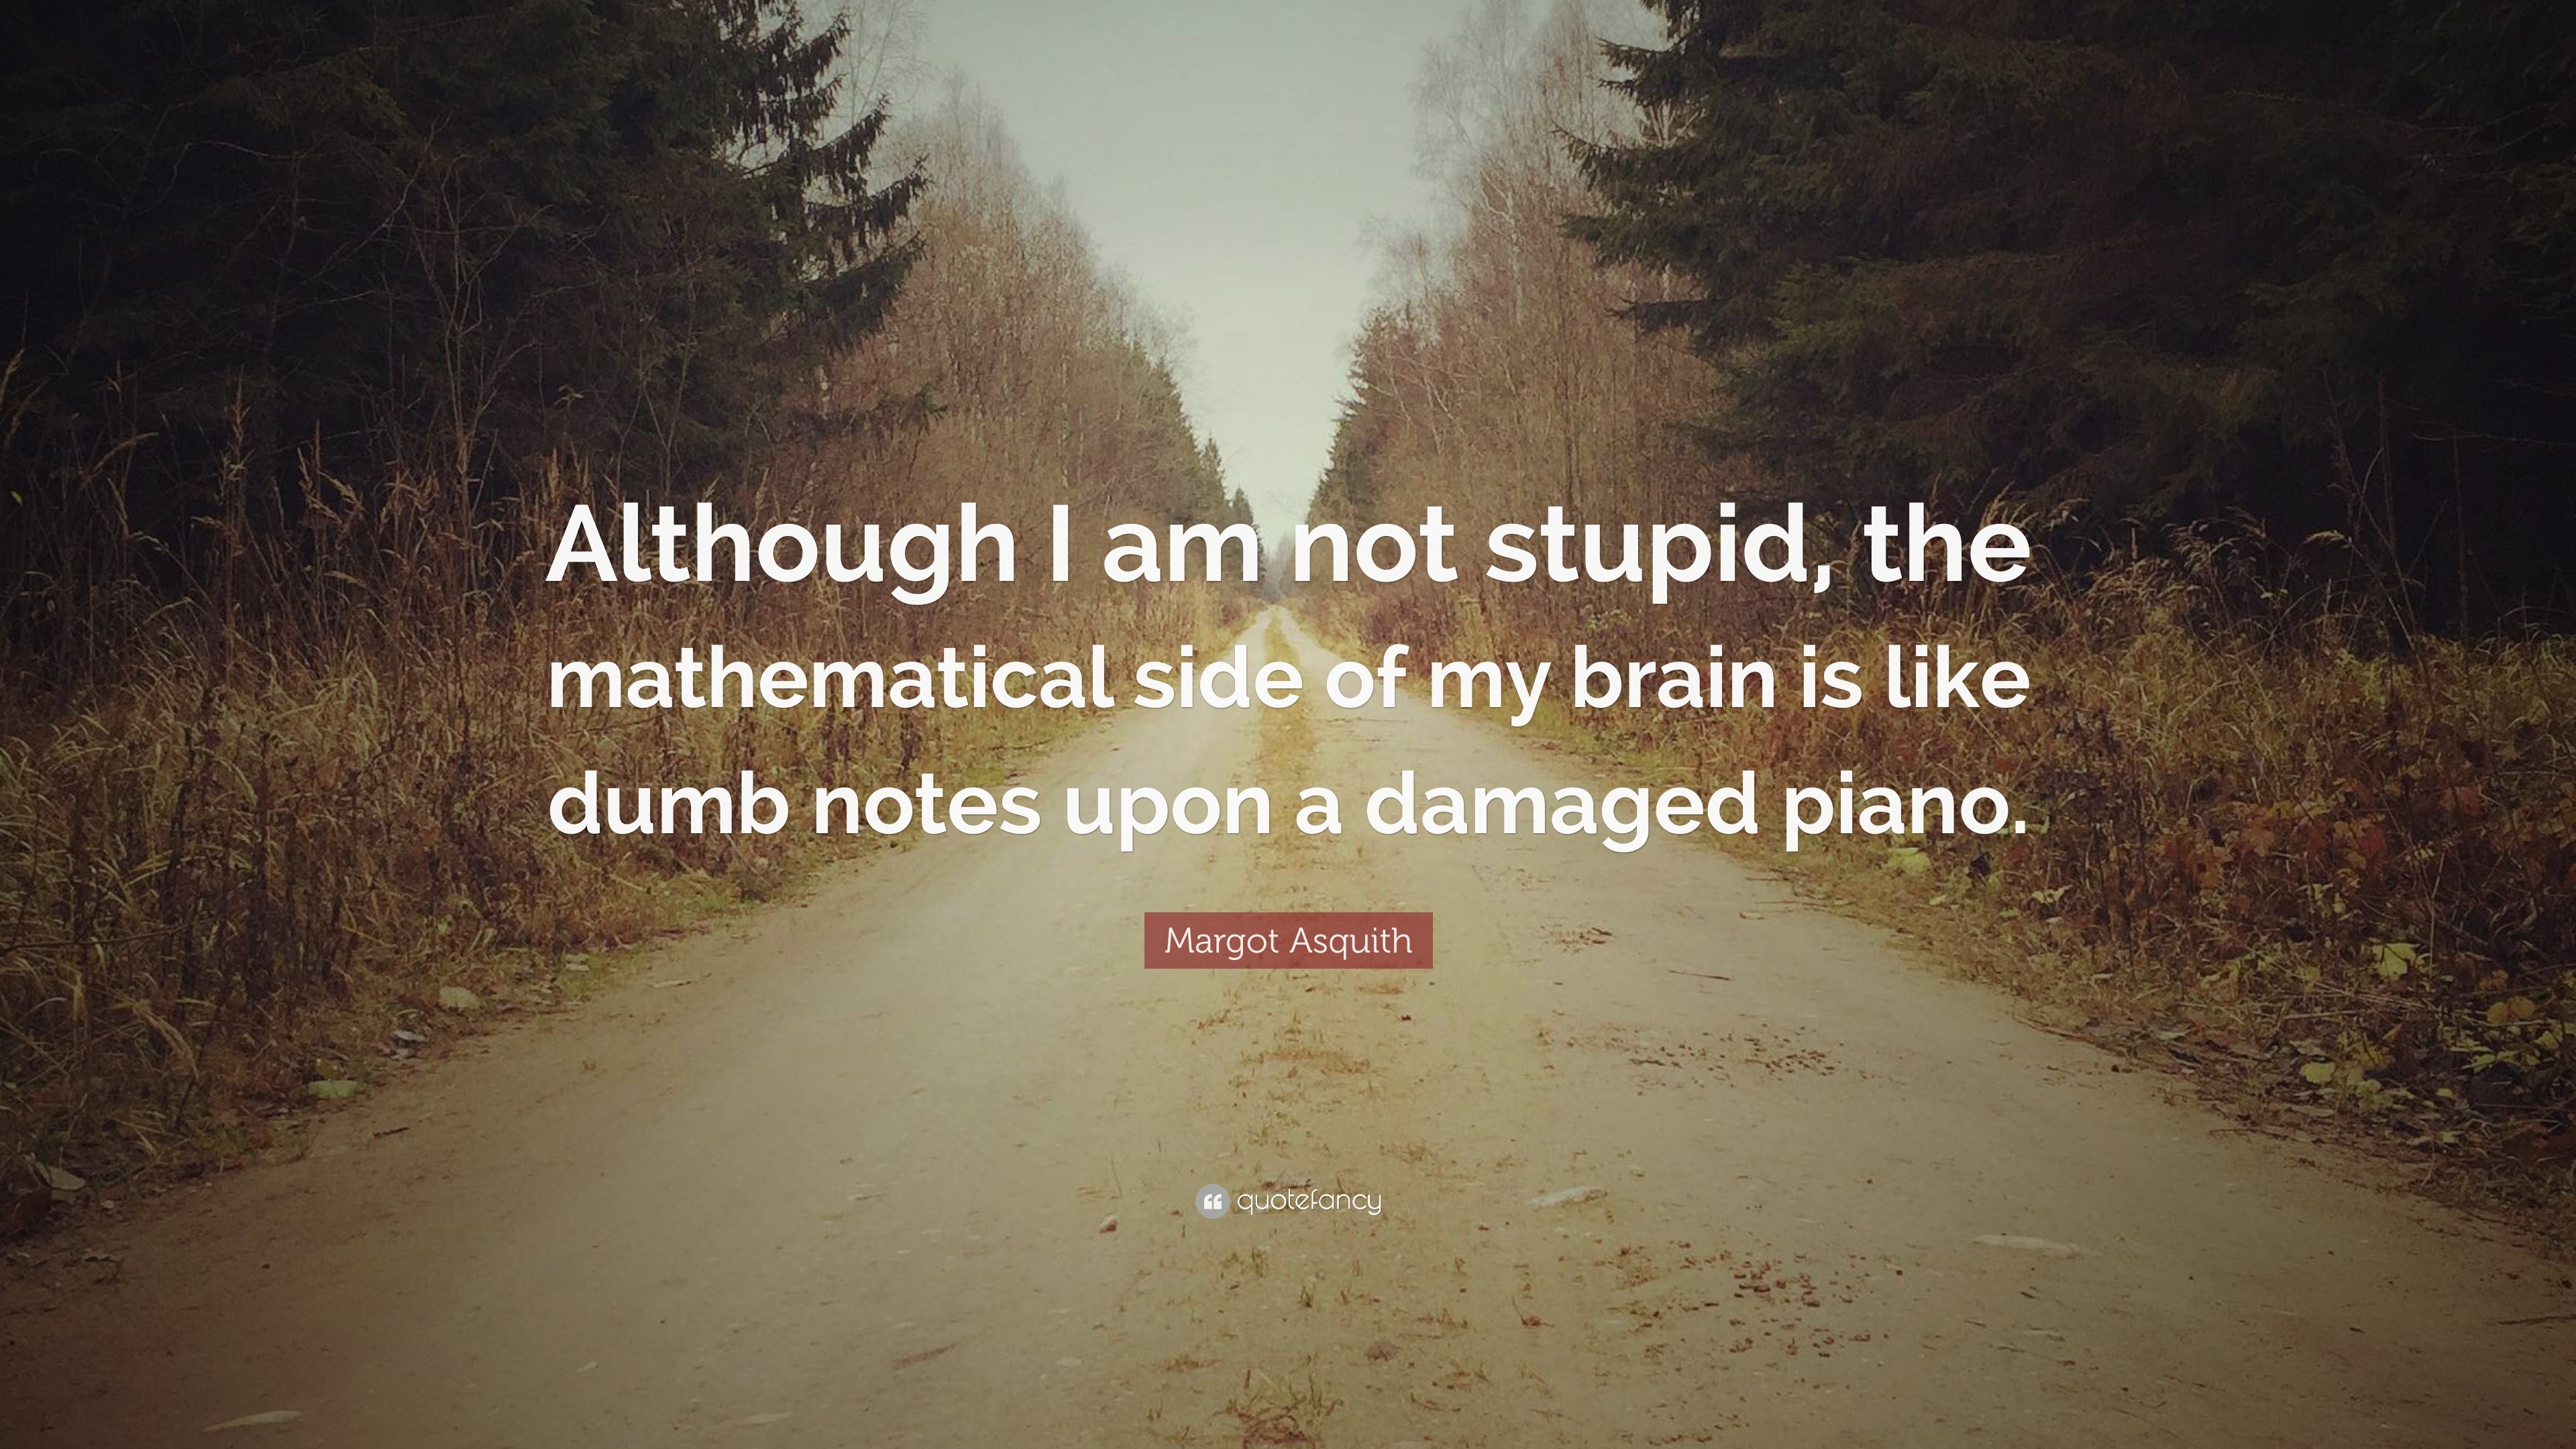 3840x2160 Margot Asquith Quote: “Although I am not stupid, the mathematical side of my